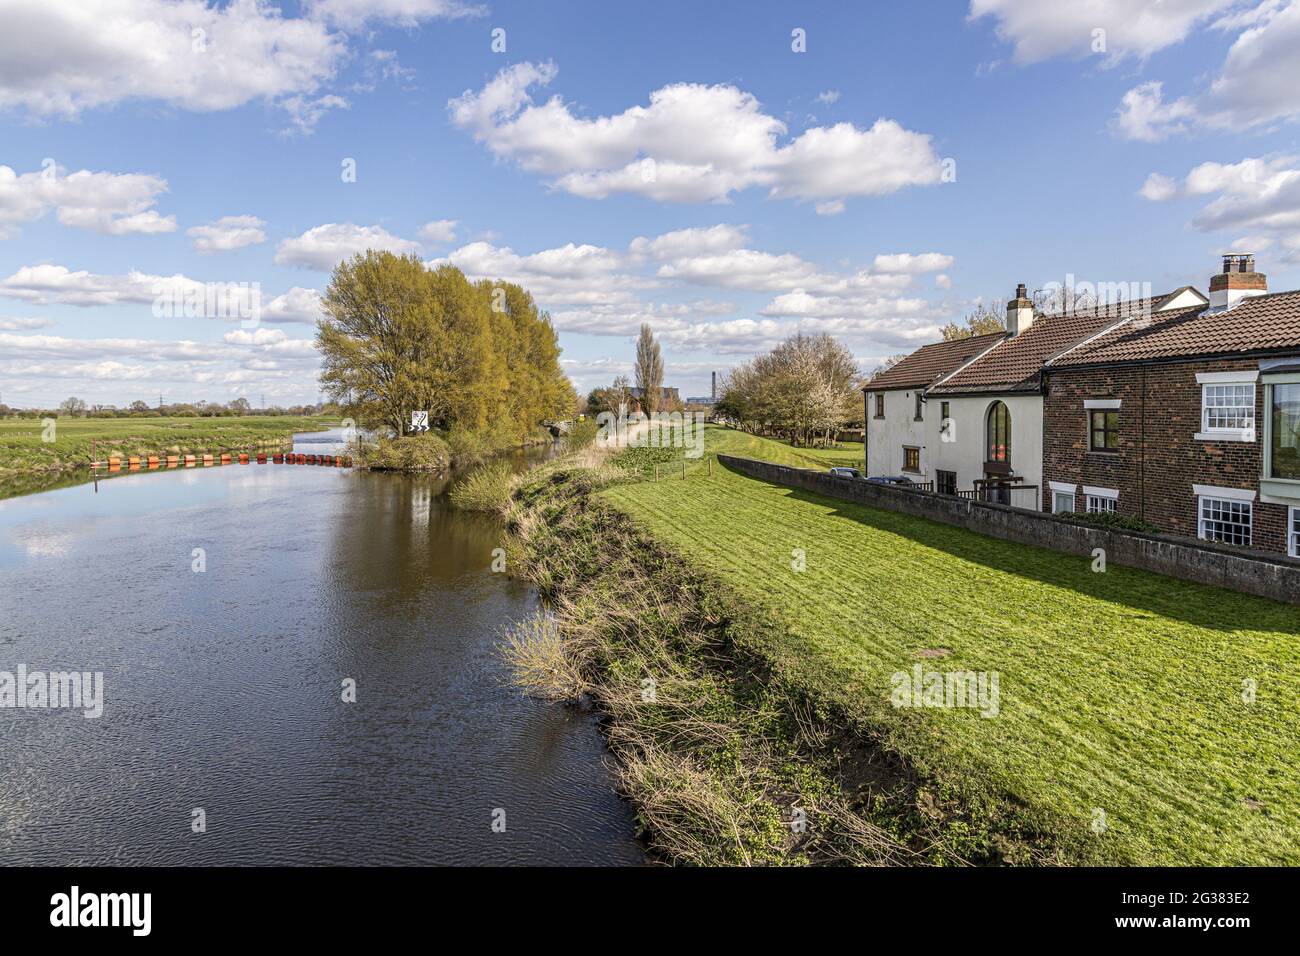 Looking East along the River Aire towards Drax Power Station from the village of Beal, North Yorkshire UK Stock Photo